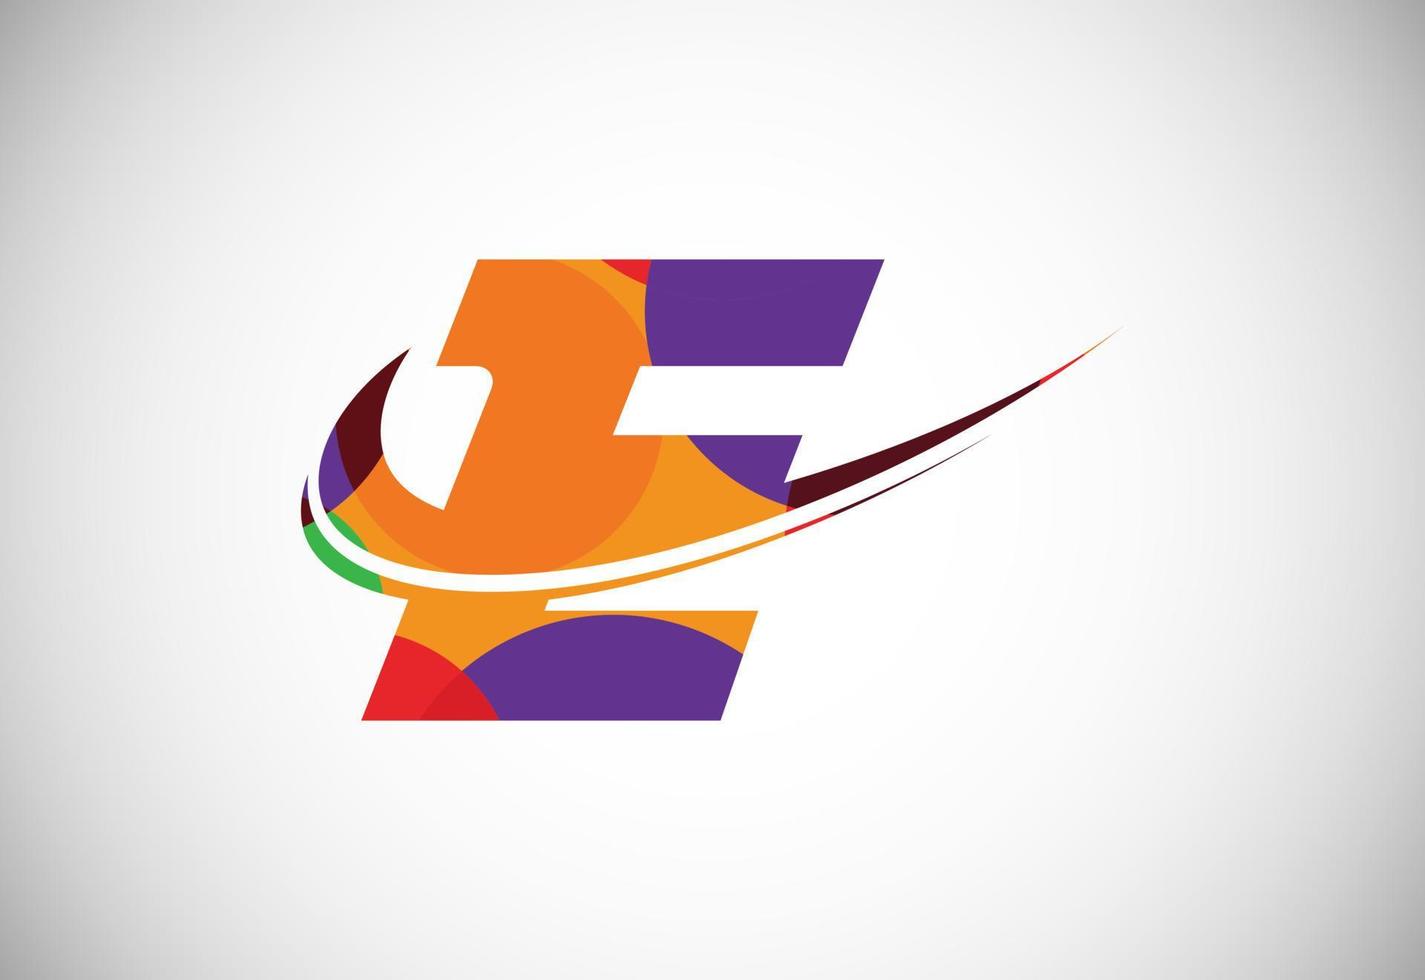 Polygonal low poly letter E with a swoosh logo. Modern vector logotype for business and company identity.